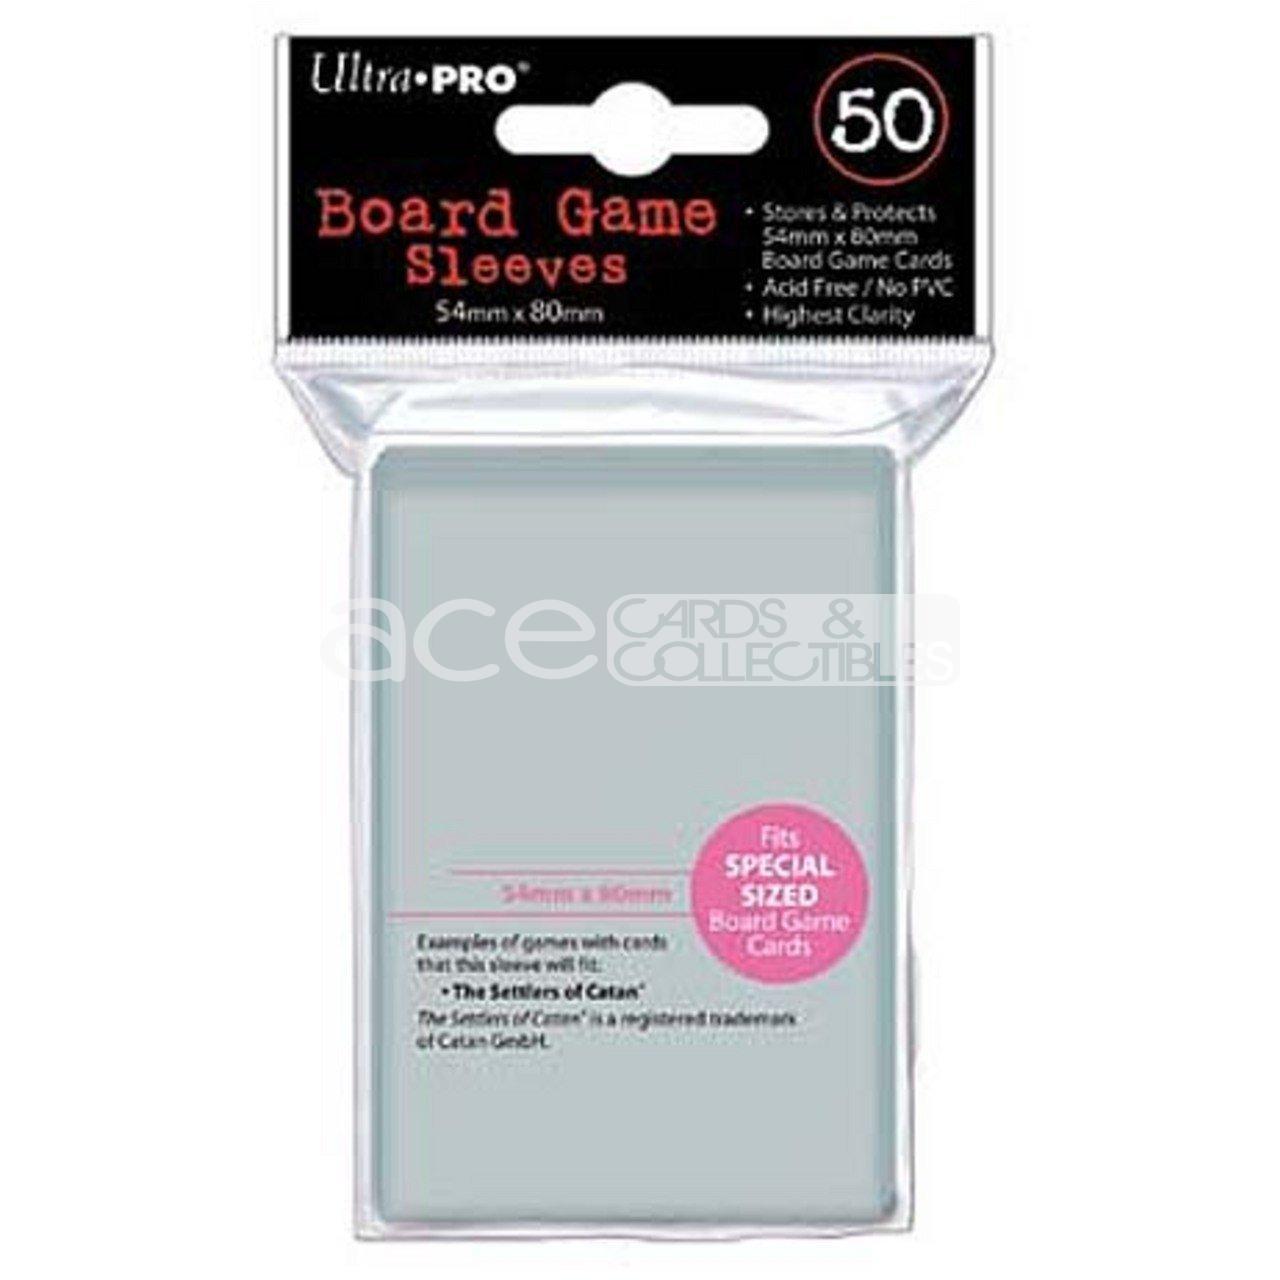 Ultra PRO Board Game Card Sleeve 50ct Fits Special Sized [54mm X 80mm] (Clear)-Ultra PRO-Ace Cards & Collectibles